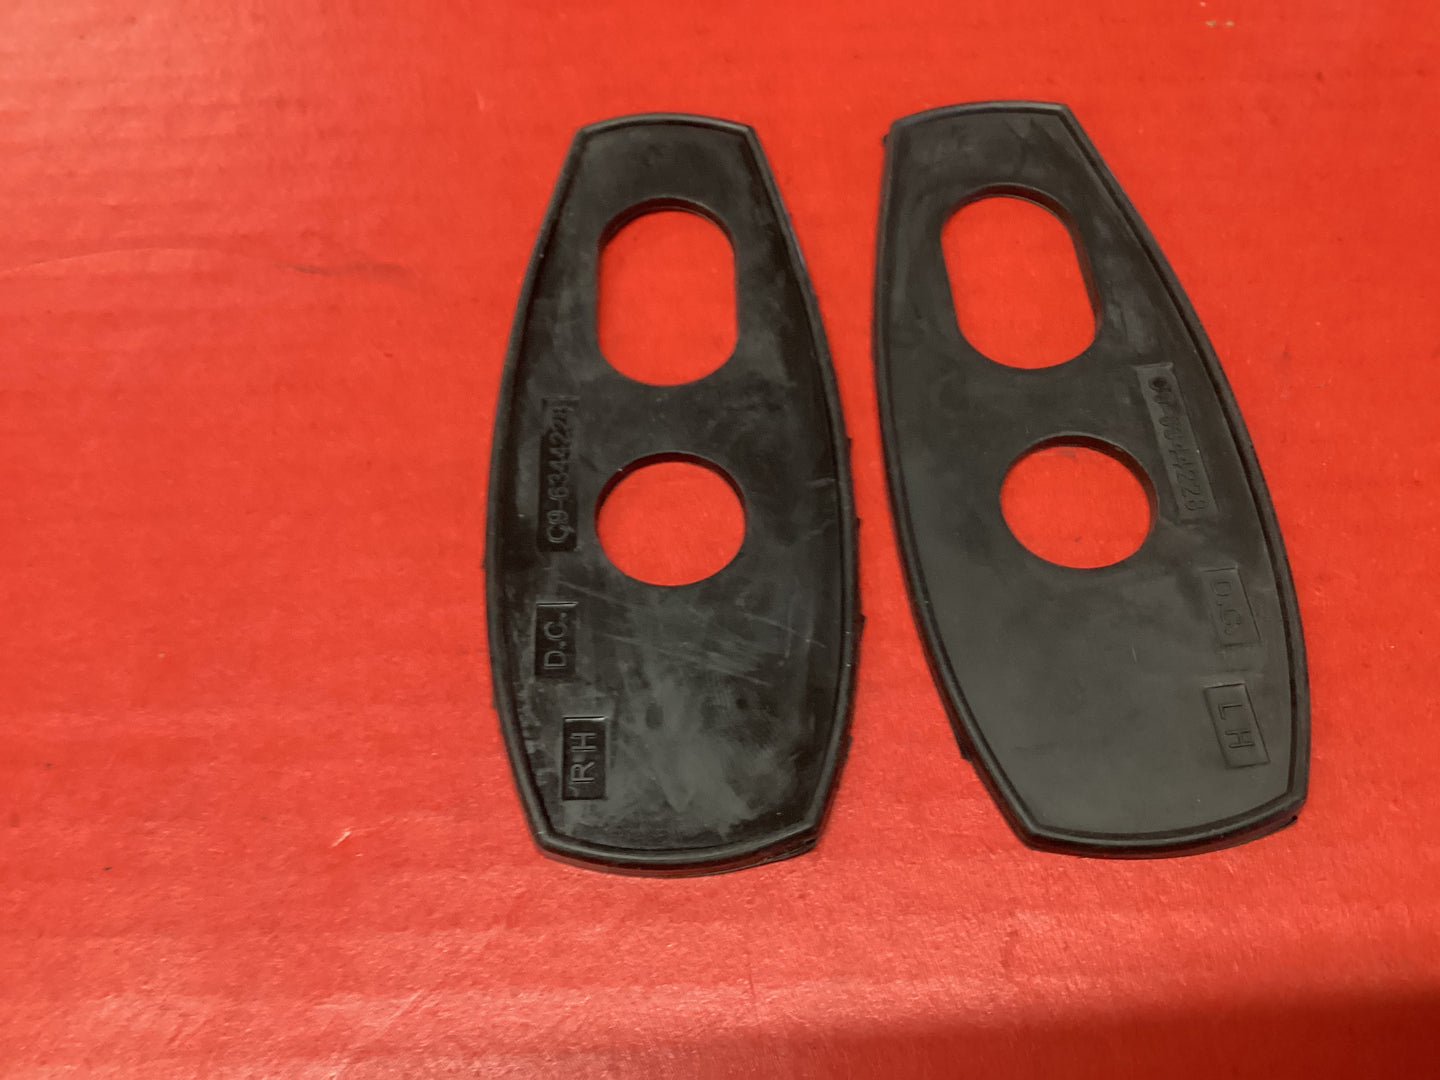 Mustang 1969-1973 Rear Spoiler Rubber Gaskets Pair. Used between base and trunk lid.